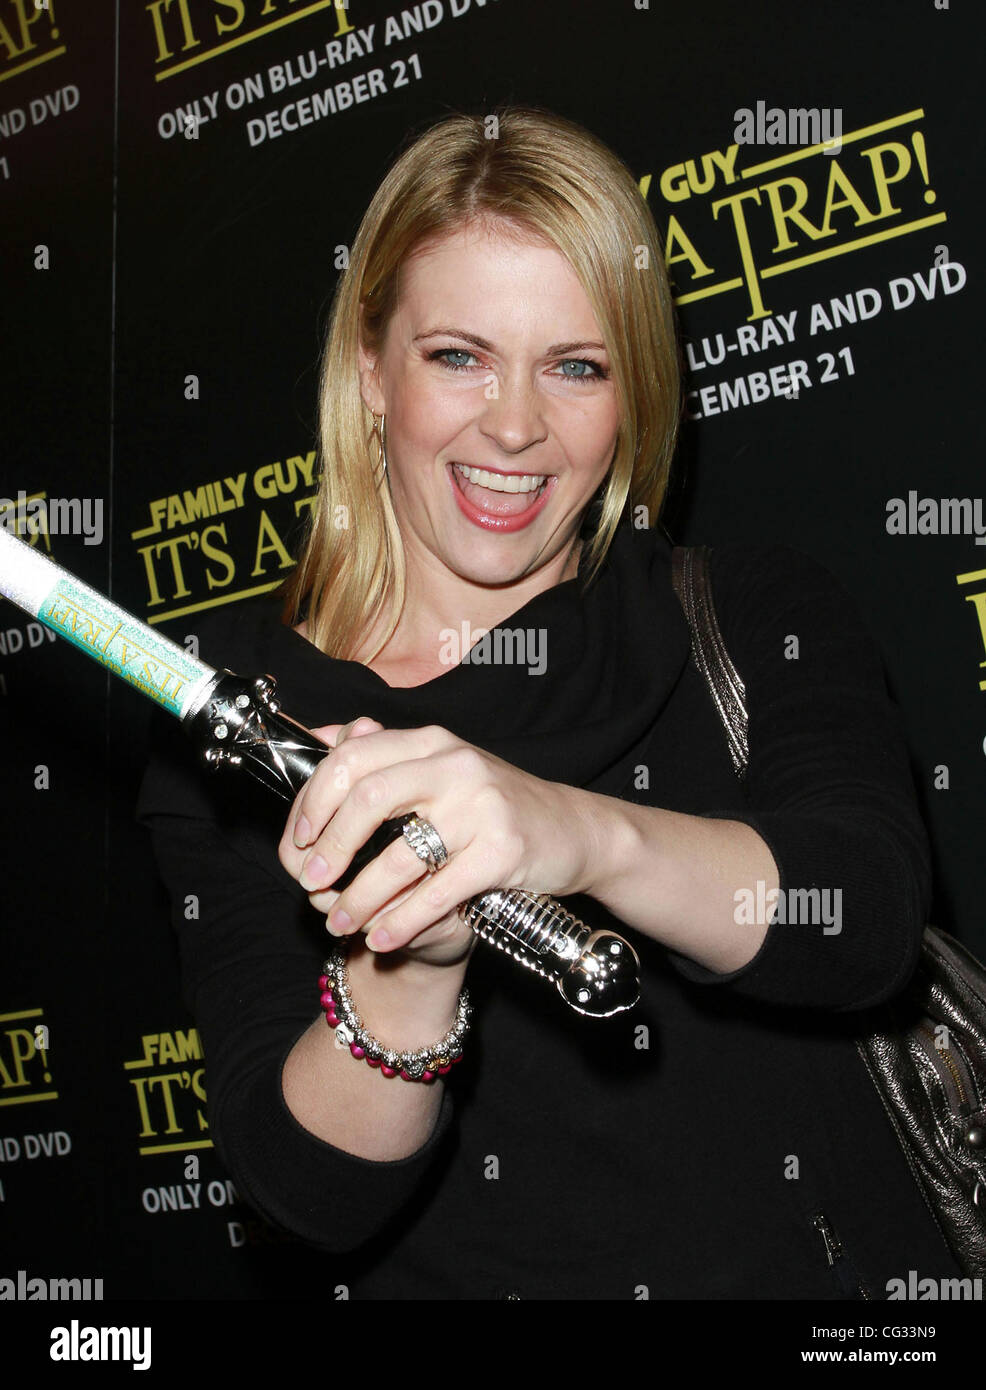 Melissa Joan Hart 'Family Guy: It's A Trap' DVD Launch Party held at Supperclub Hollywood, California - 14.12.10 Stock Photo